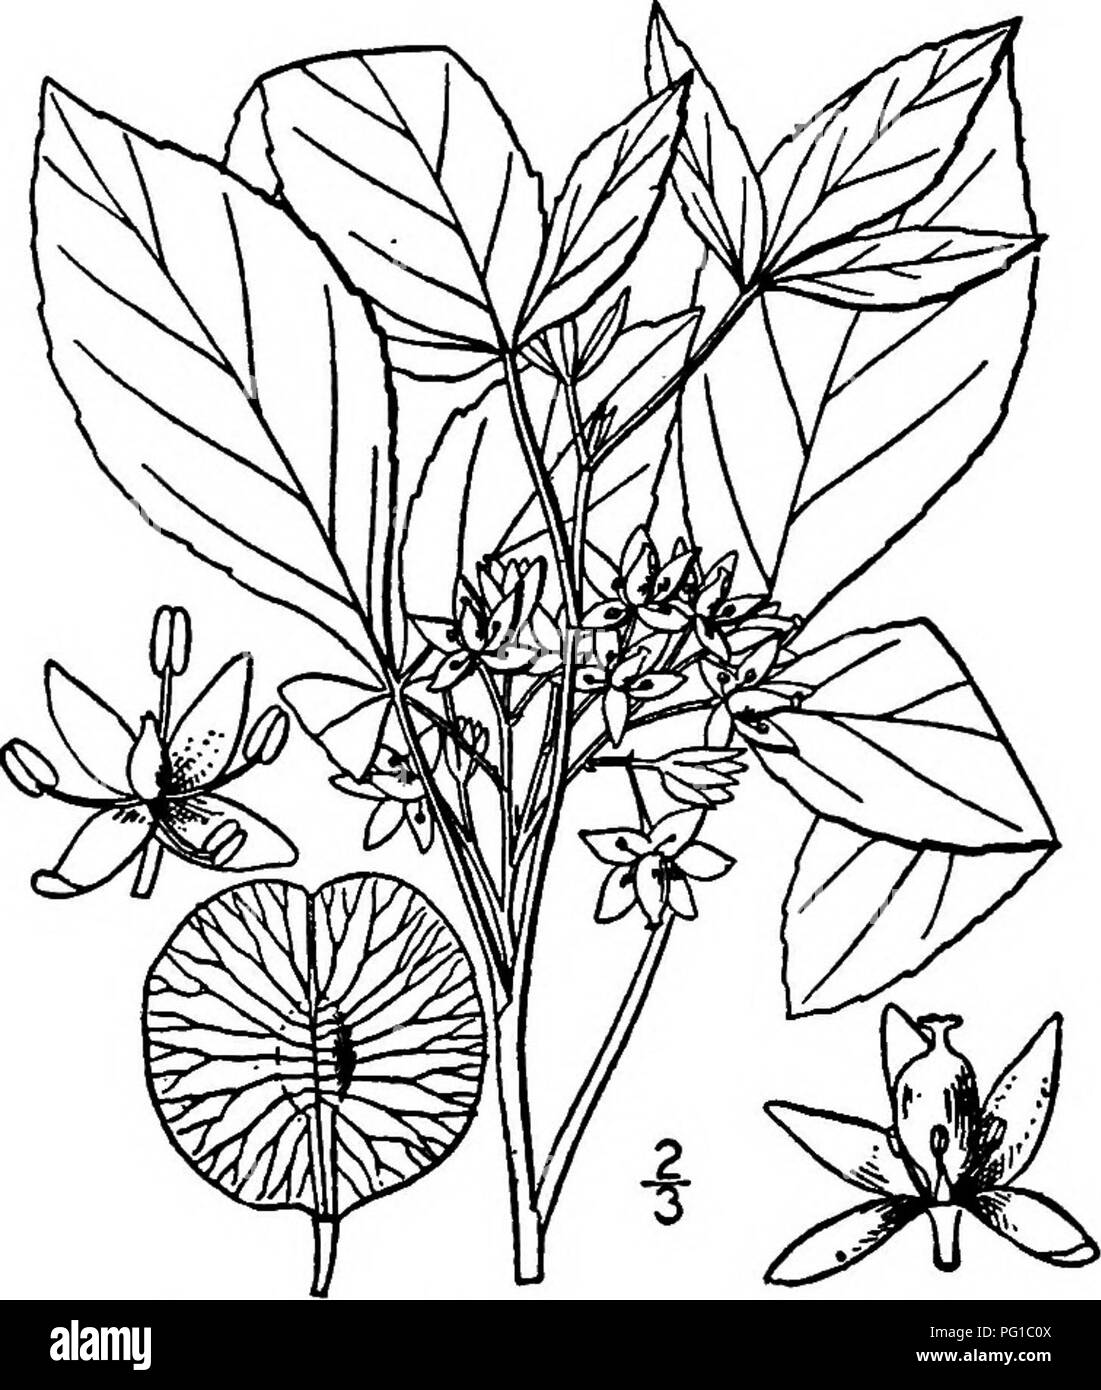 . North American trees : being descriptions and illustrations of the trees growing independently of cultivation in North America, north of Mexico and the West Indies . Trees. 574 The Hop Trees I. THREE-LEAVED HOP-TREE — Ptelea trifoliata Linnseus Occurring from Ontario to Florida, Minnesota, Kansas and Texas as a well- known shrub under various names, such as Shrubby trefoil, Whahoo, Quinine tree. Sang tree. Hop ash. Stinking ash, Water ash. Wafer ash, and Wing seed, this rarely becomes a tree 7.5 meters tall, with a trunk diameter of 2 dm. It has a rather disagreeable odor. The trunk is slend Stock Photo